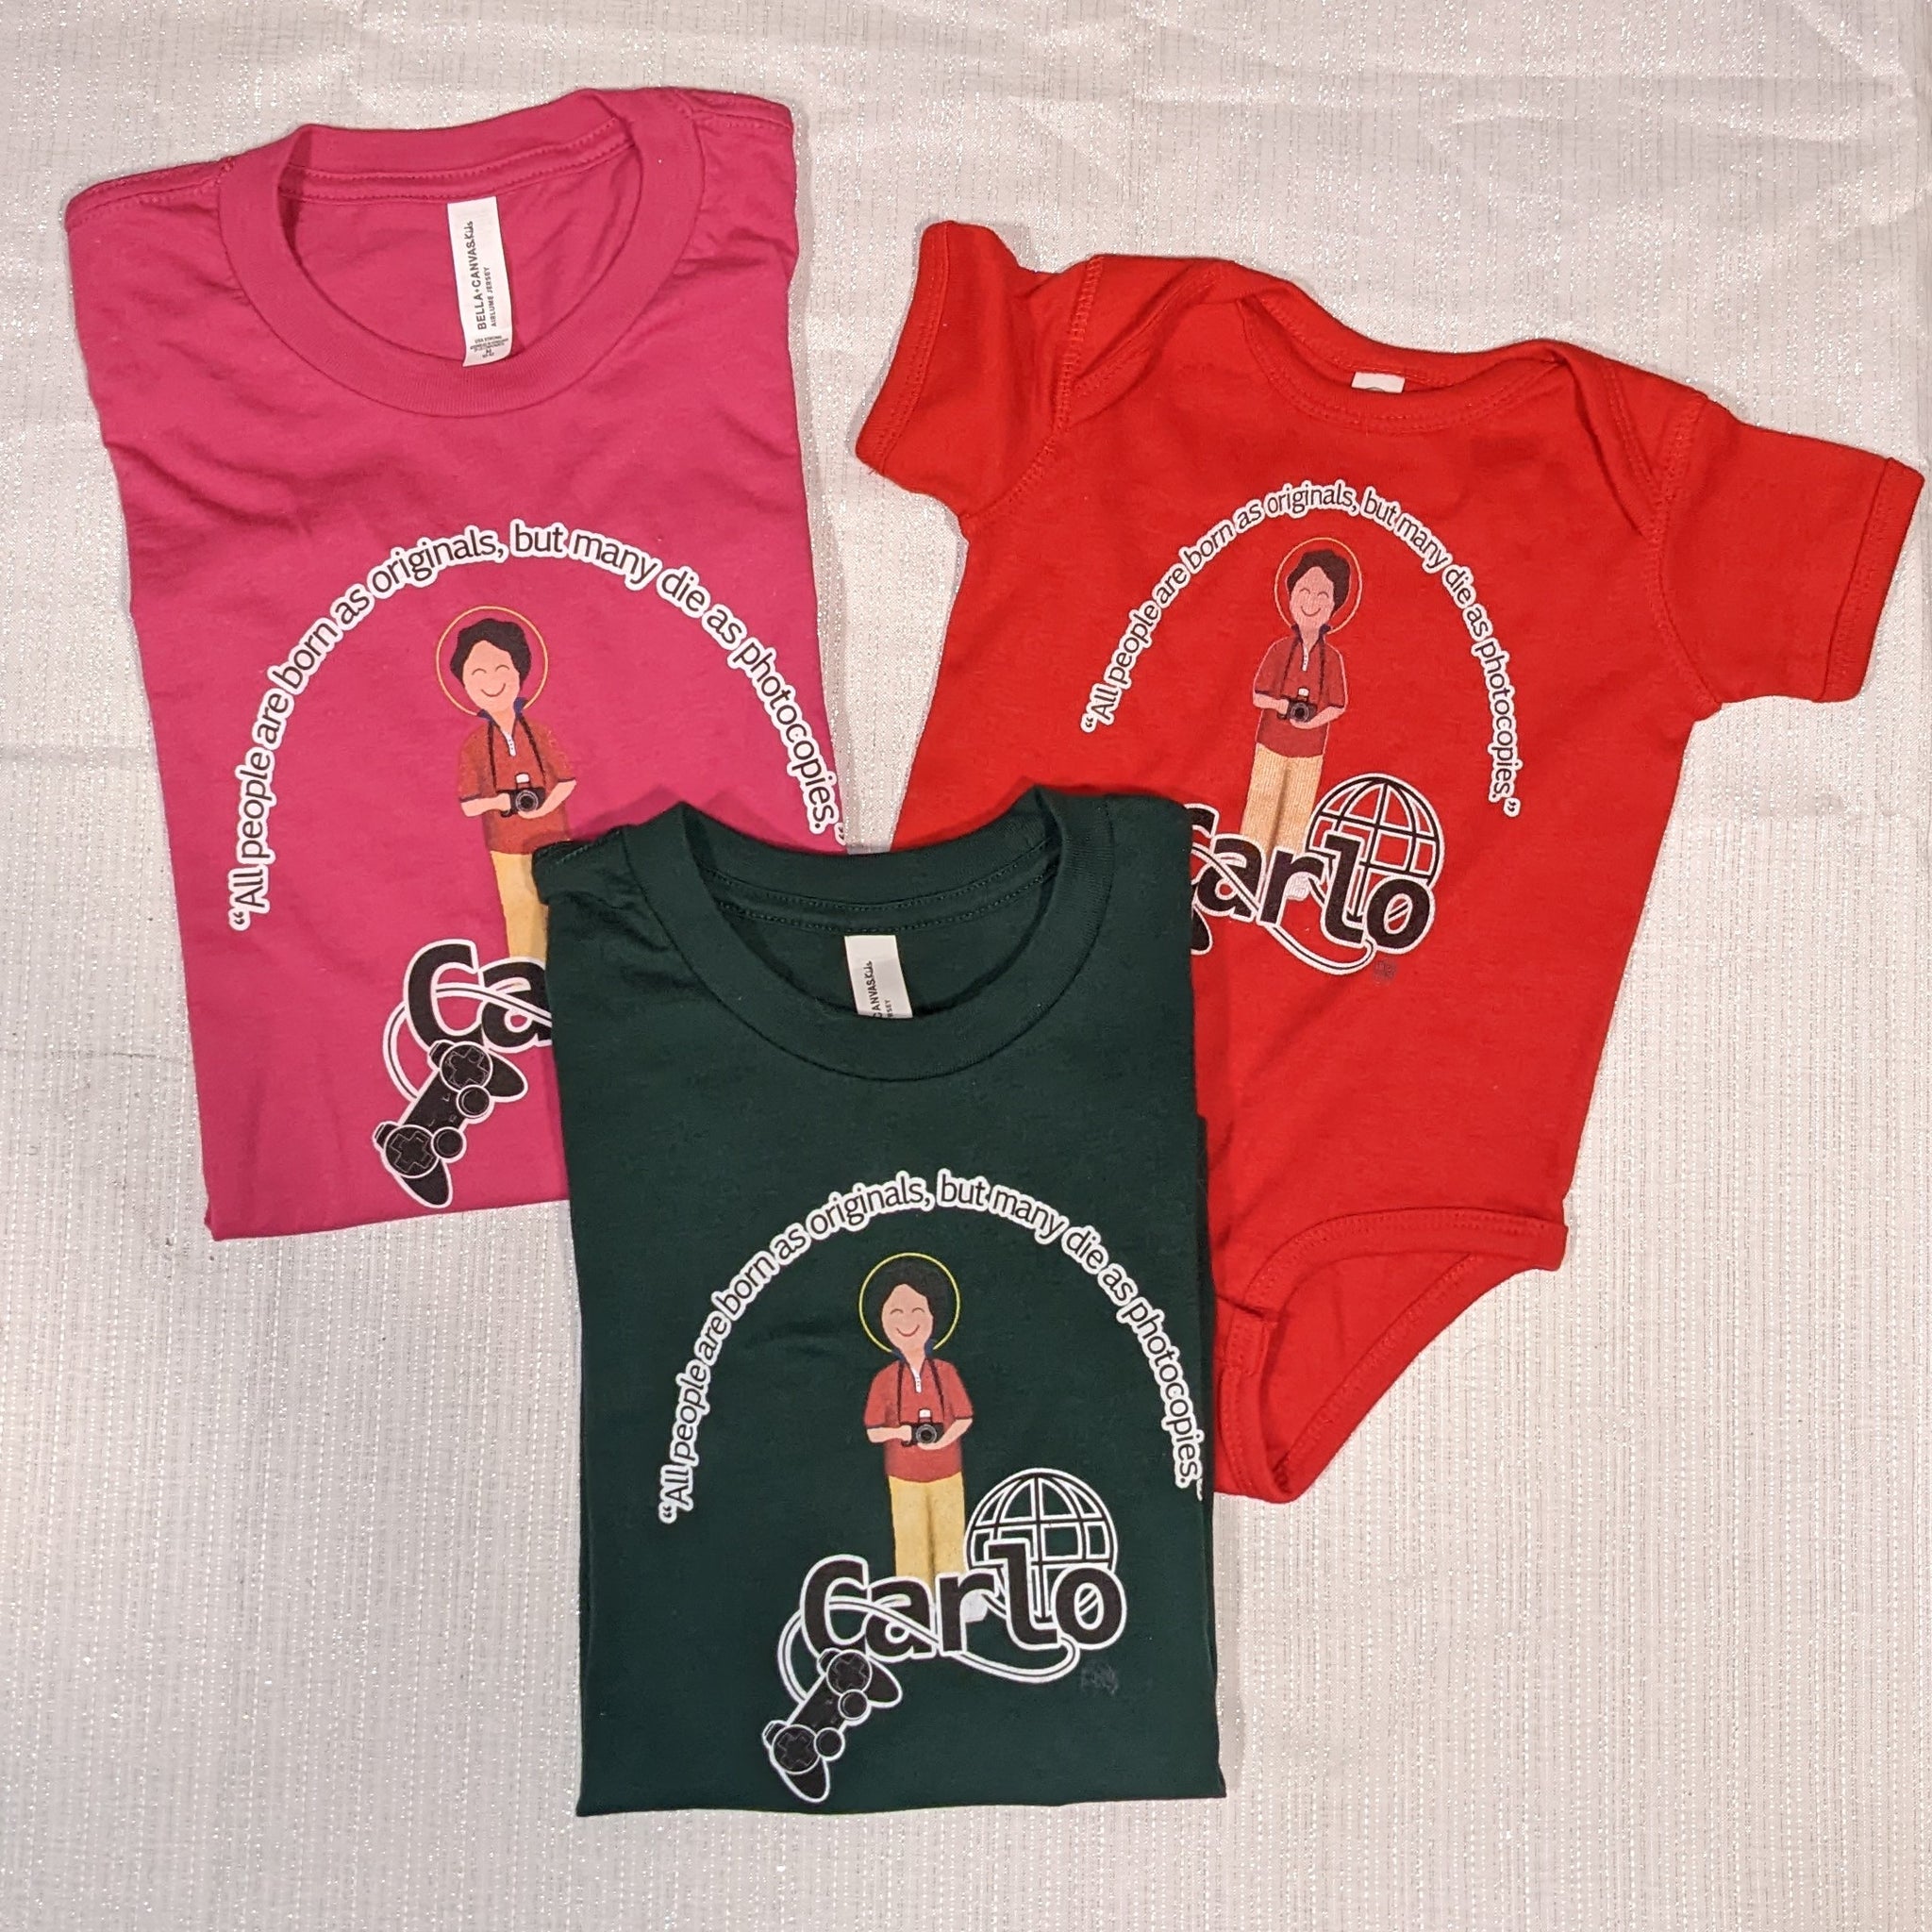 Three Catholic kids shirts, one a baby onesie, featuring Bl. Carlo Acutis and the phrase "All people are born as originals but many die as photocopies."